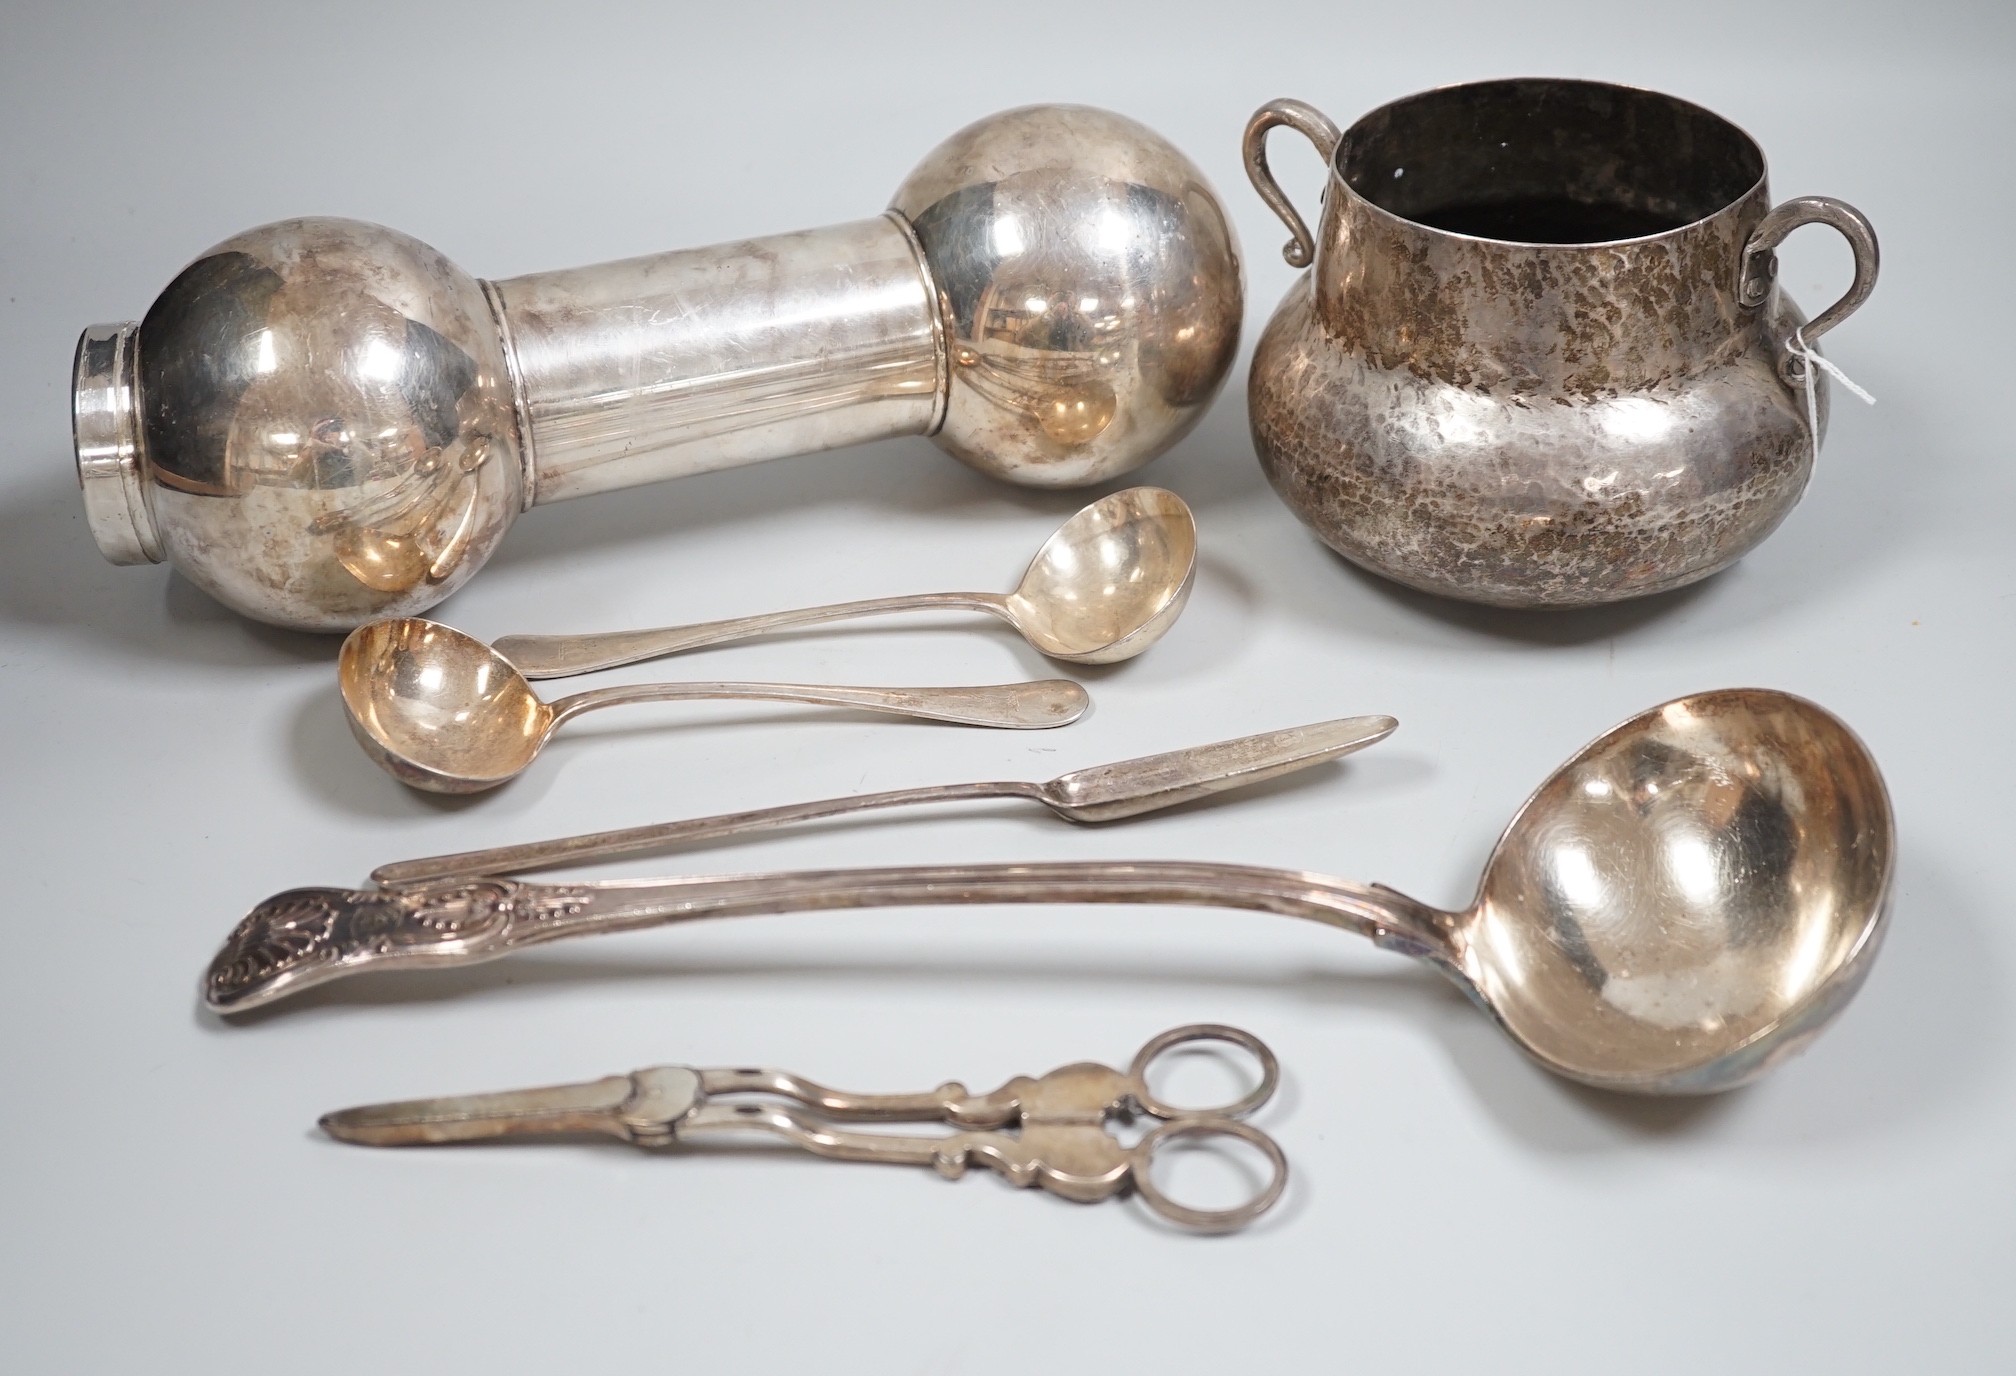 Mixed silver and plated ware including a Victorian silver Kings pattern soup ladle, London, 1857, a George III silver marrow scoop, London, 1789, a pair of later Old English pattern sauce ladles, a sterling bonbon dish, 